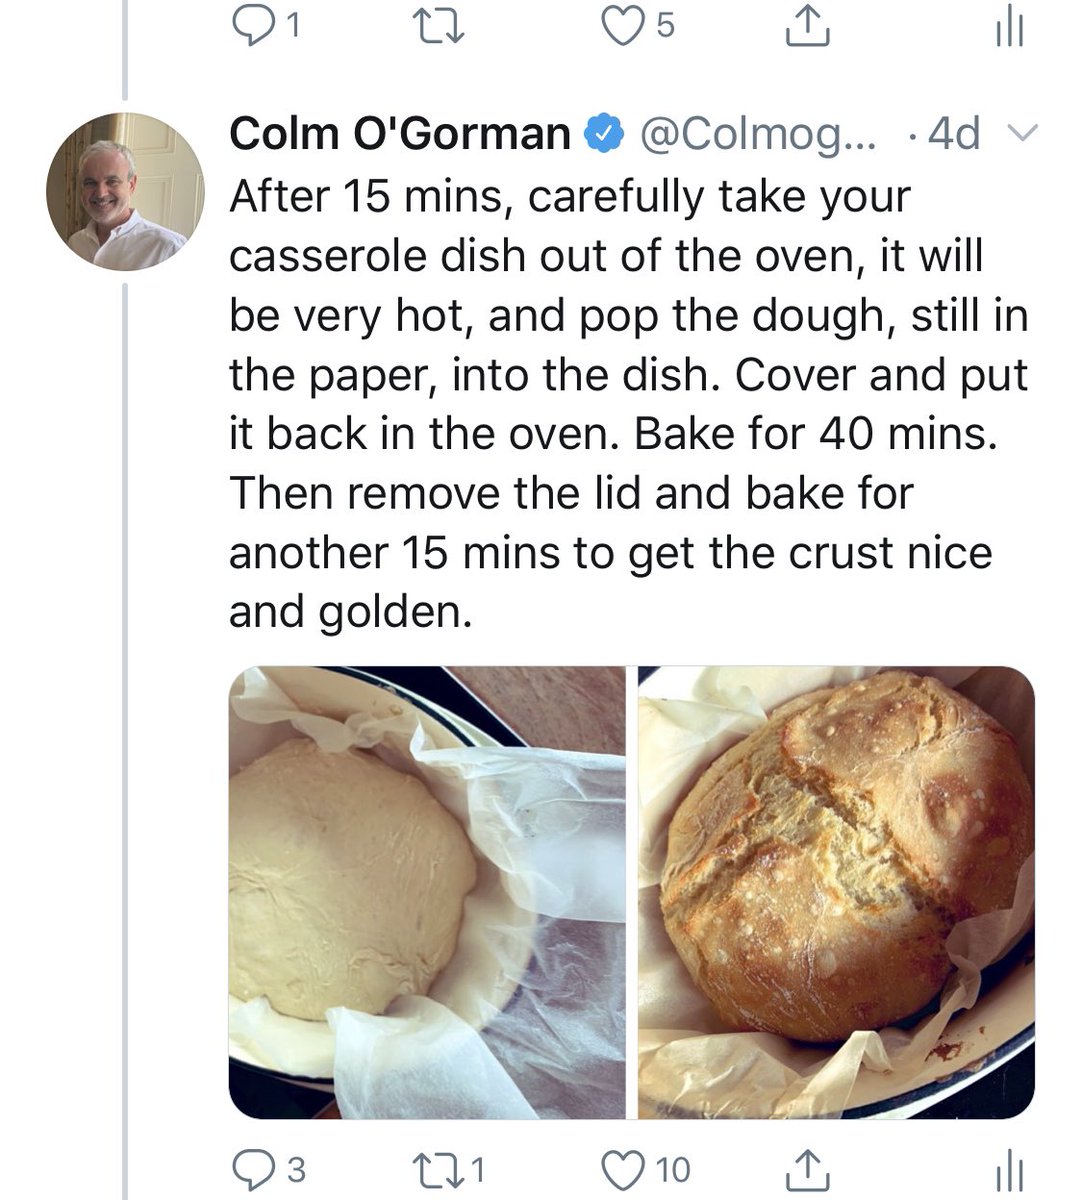 Ooops. Just had a typo pointed out in this thread. This one should have read ‘Bake for 30 mins. Then remove the lid and bake for another 15 mins to get the crust nice and golden.’